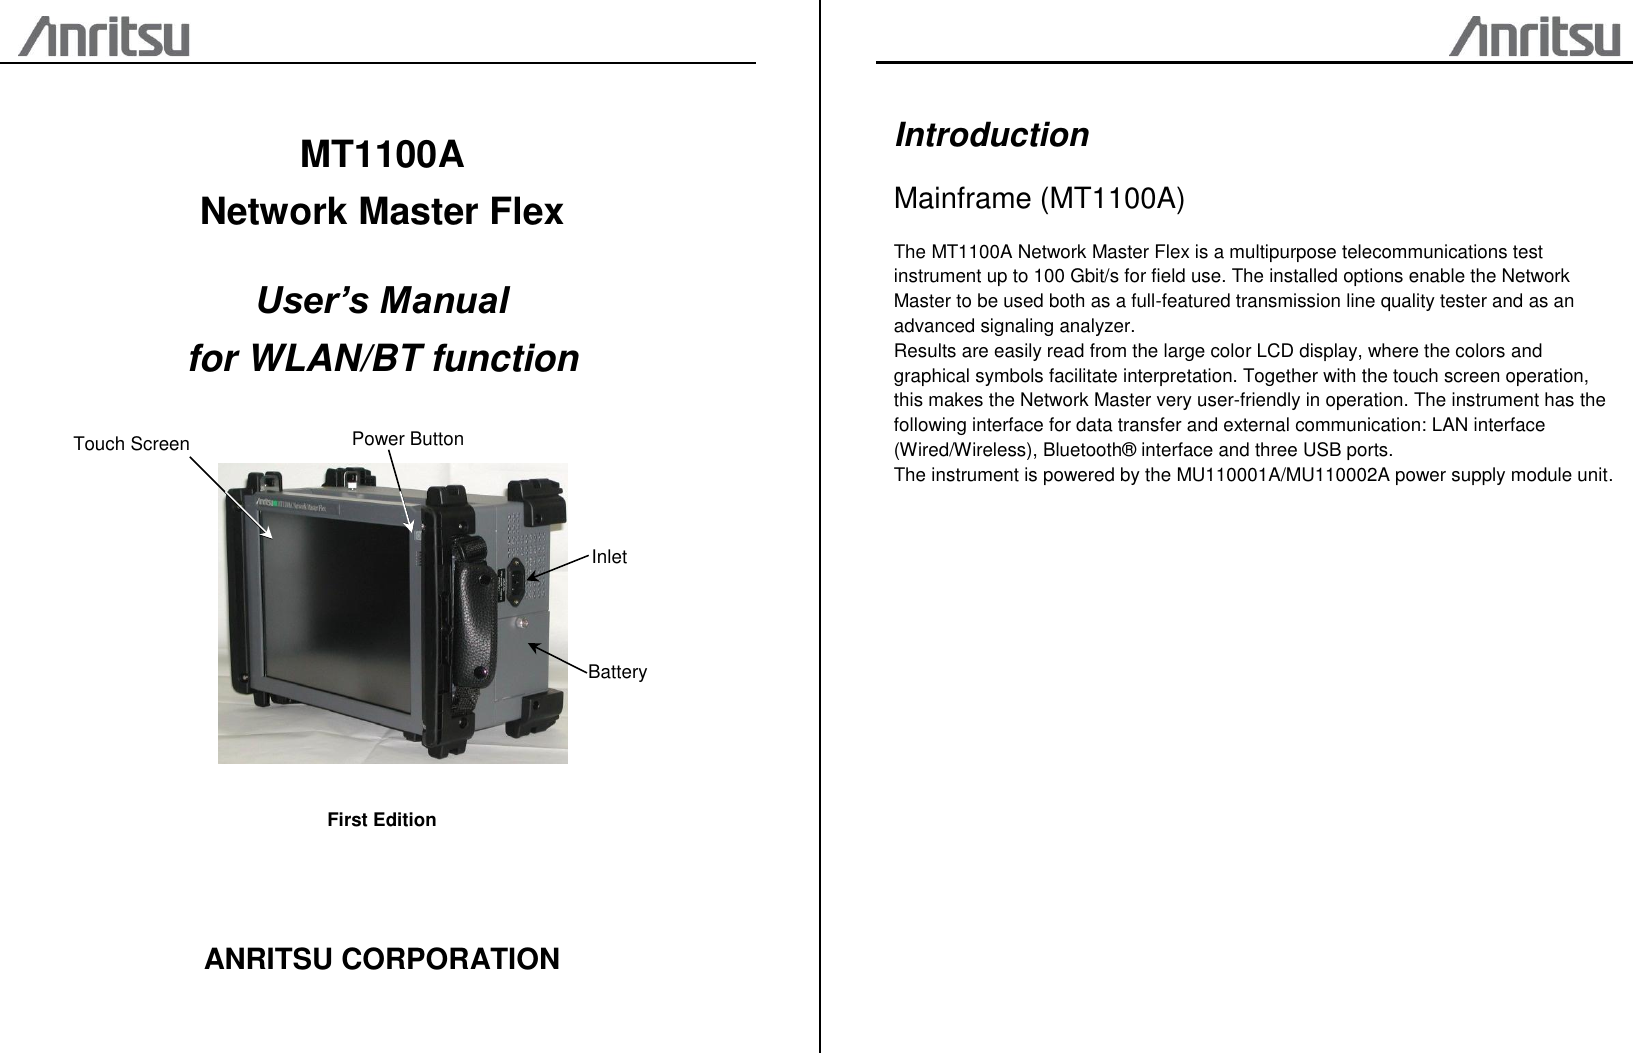                           MT1100A Network Master Flex  User’s Manual for WLAN/BT function    First Edition    ANRITSU CORPORATION    Introduction Mainframe (MT1100A) The MT1100A Network Master Flex is a multipurpose telecommunications test instrument up to 100 Gbit/s for field use. The installed options enable the Network Master to be used both as a full-featured transmission line quality tester and as an advanced signaling analyzer. Results are easily read from the large color LCD display, where the colors and graphical symbols facilitate interpretation. Together with the touch screen operation, this makes the Network Master very user-friendly in operation. The instrument has the following interface for data transfer and external communication: LAN interface (Wired/Wireless), Bluetooth® interface and three USB ports. The instrument is powered by the MU110001A/MU110002A power supply module unit.     Power Button Inlet Touch Screen Battery 